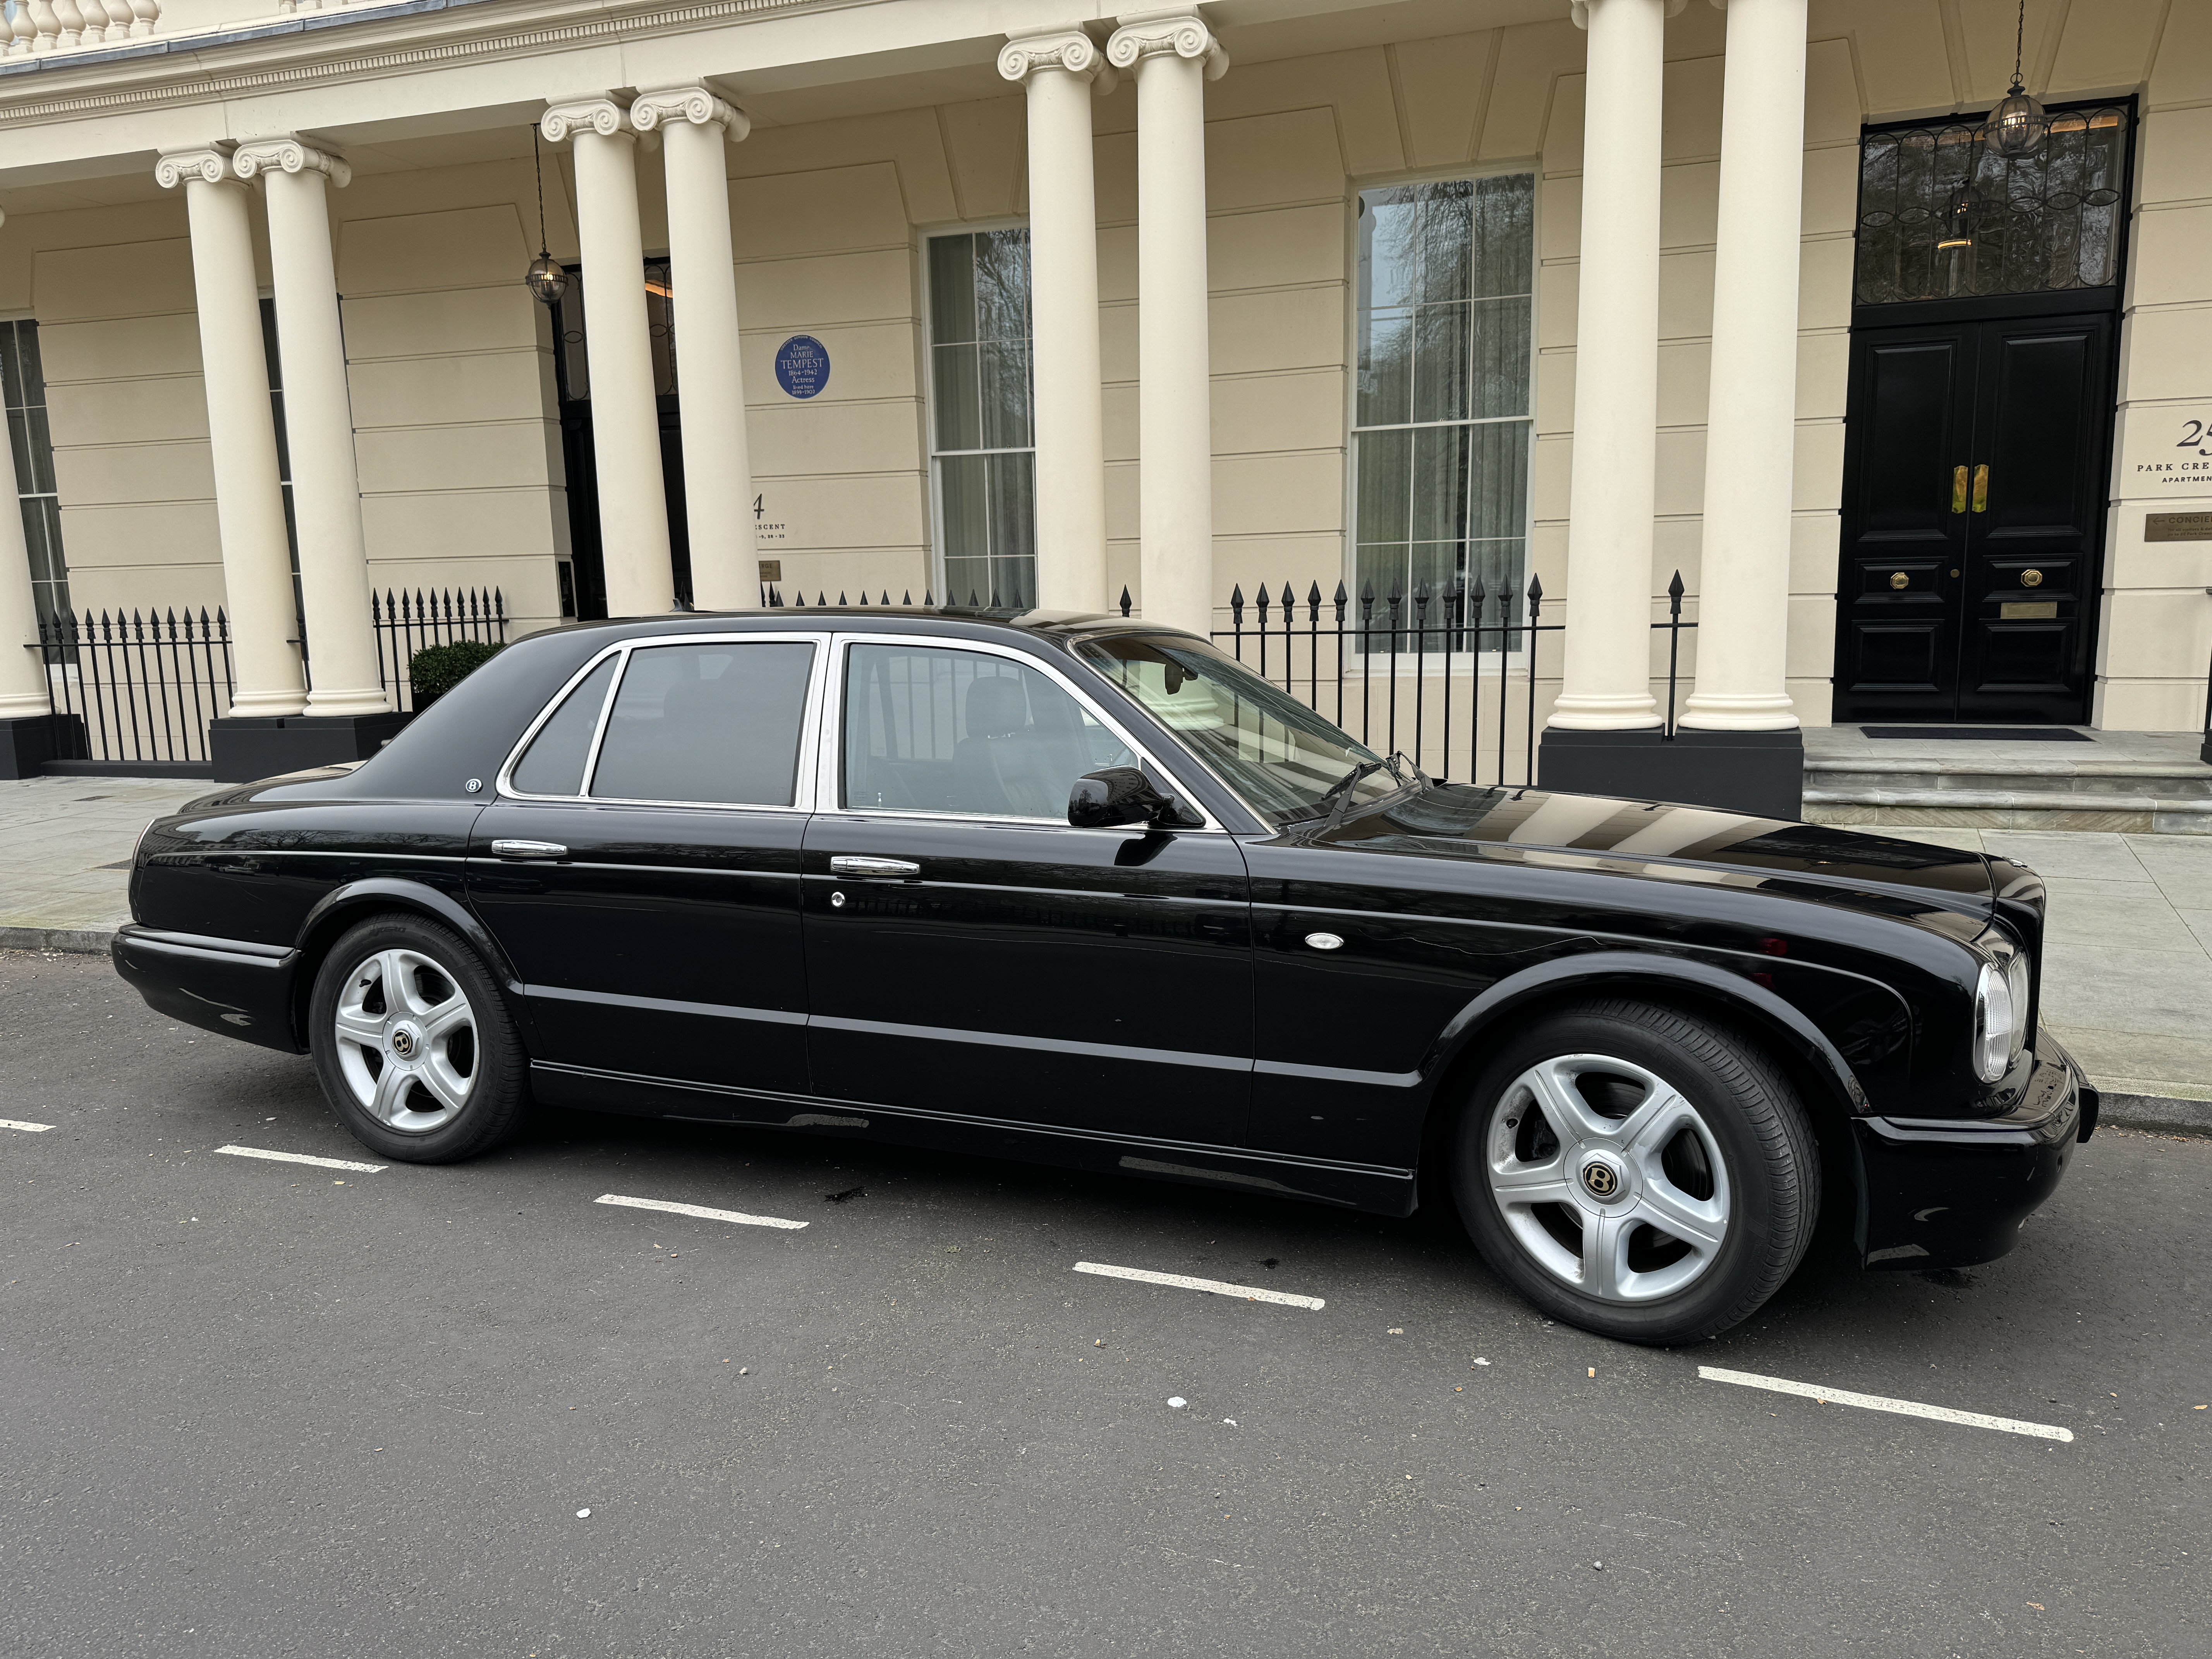 Bentley Arnage R, 6750cc V8 Twin Turbo, Black coachwork with matching black leather upholstery and - Image 69 of 78